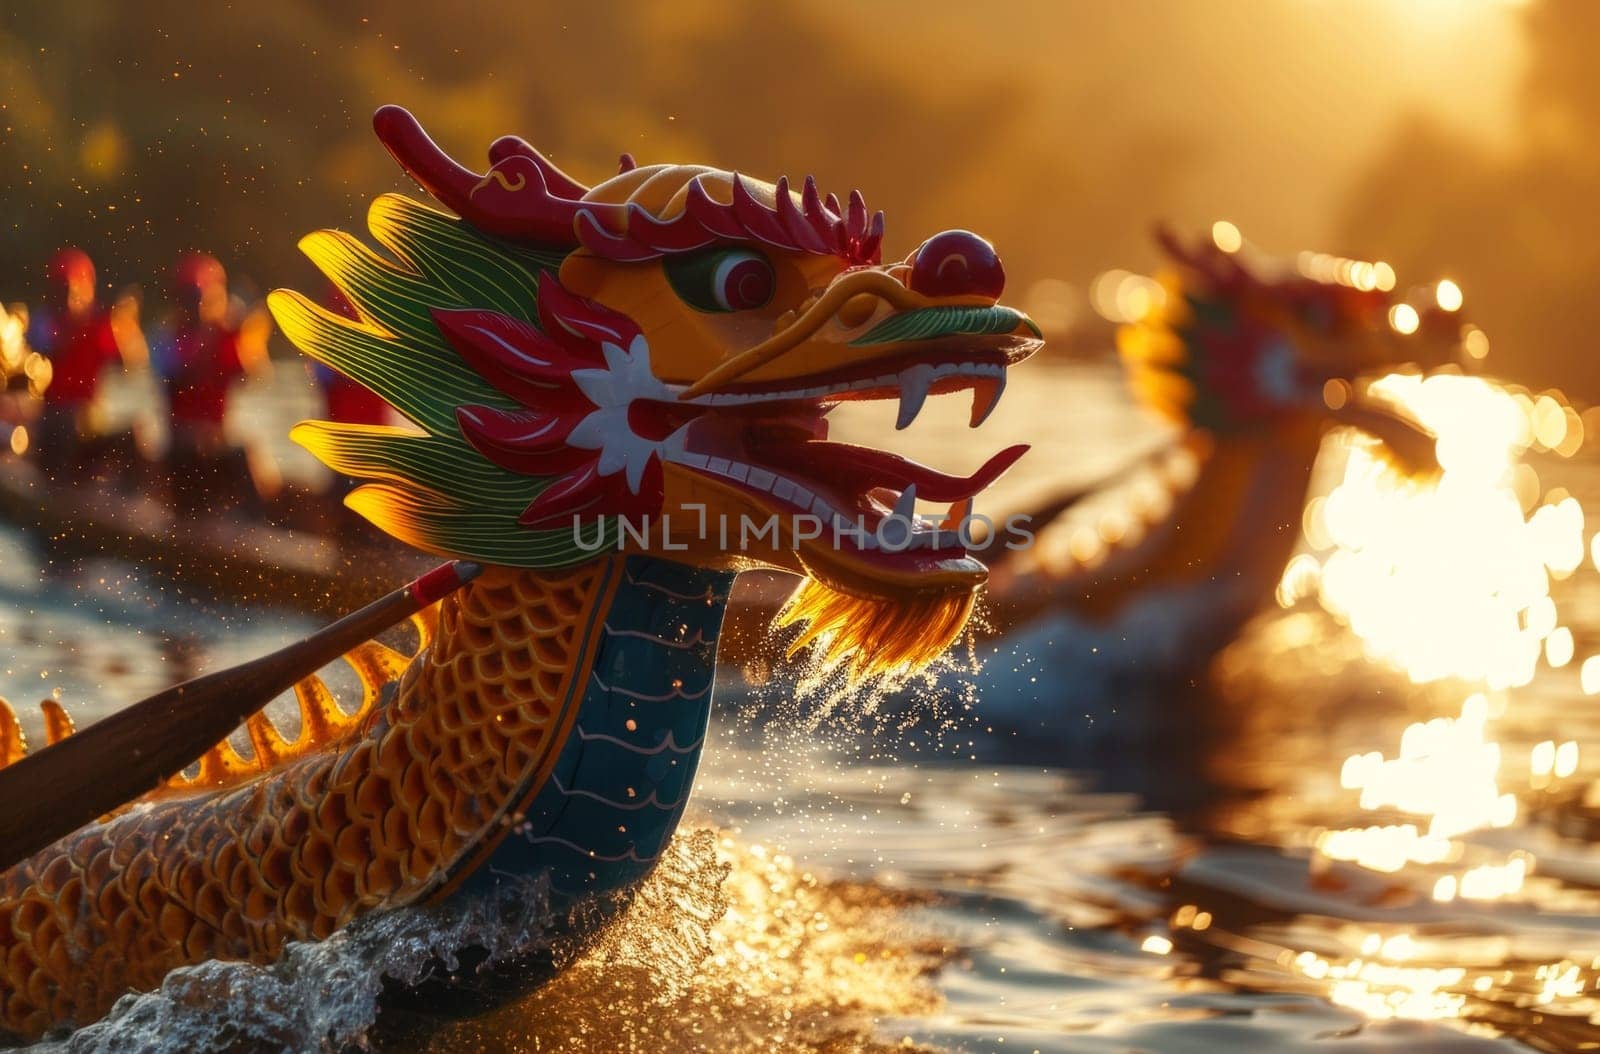 The golden hour illuminates a dragon boat race, with rowers in sync and water sparkling, capturing the spirit of this vibrant cultural event. Asian festival by sfinks